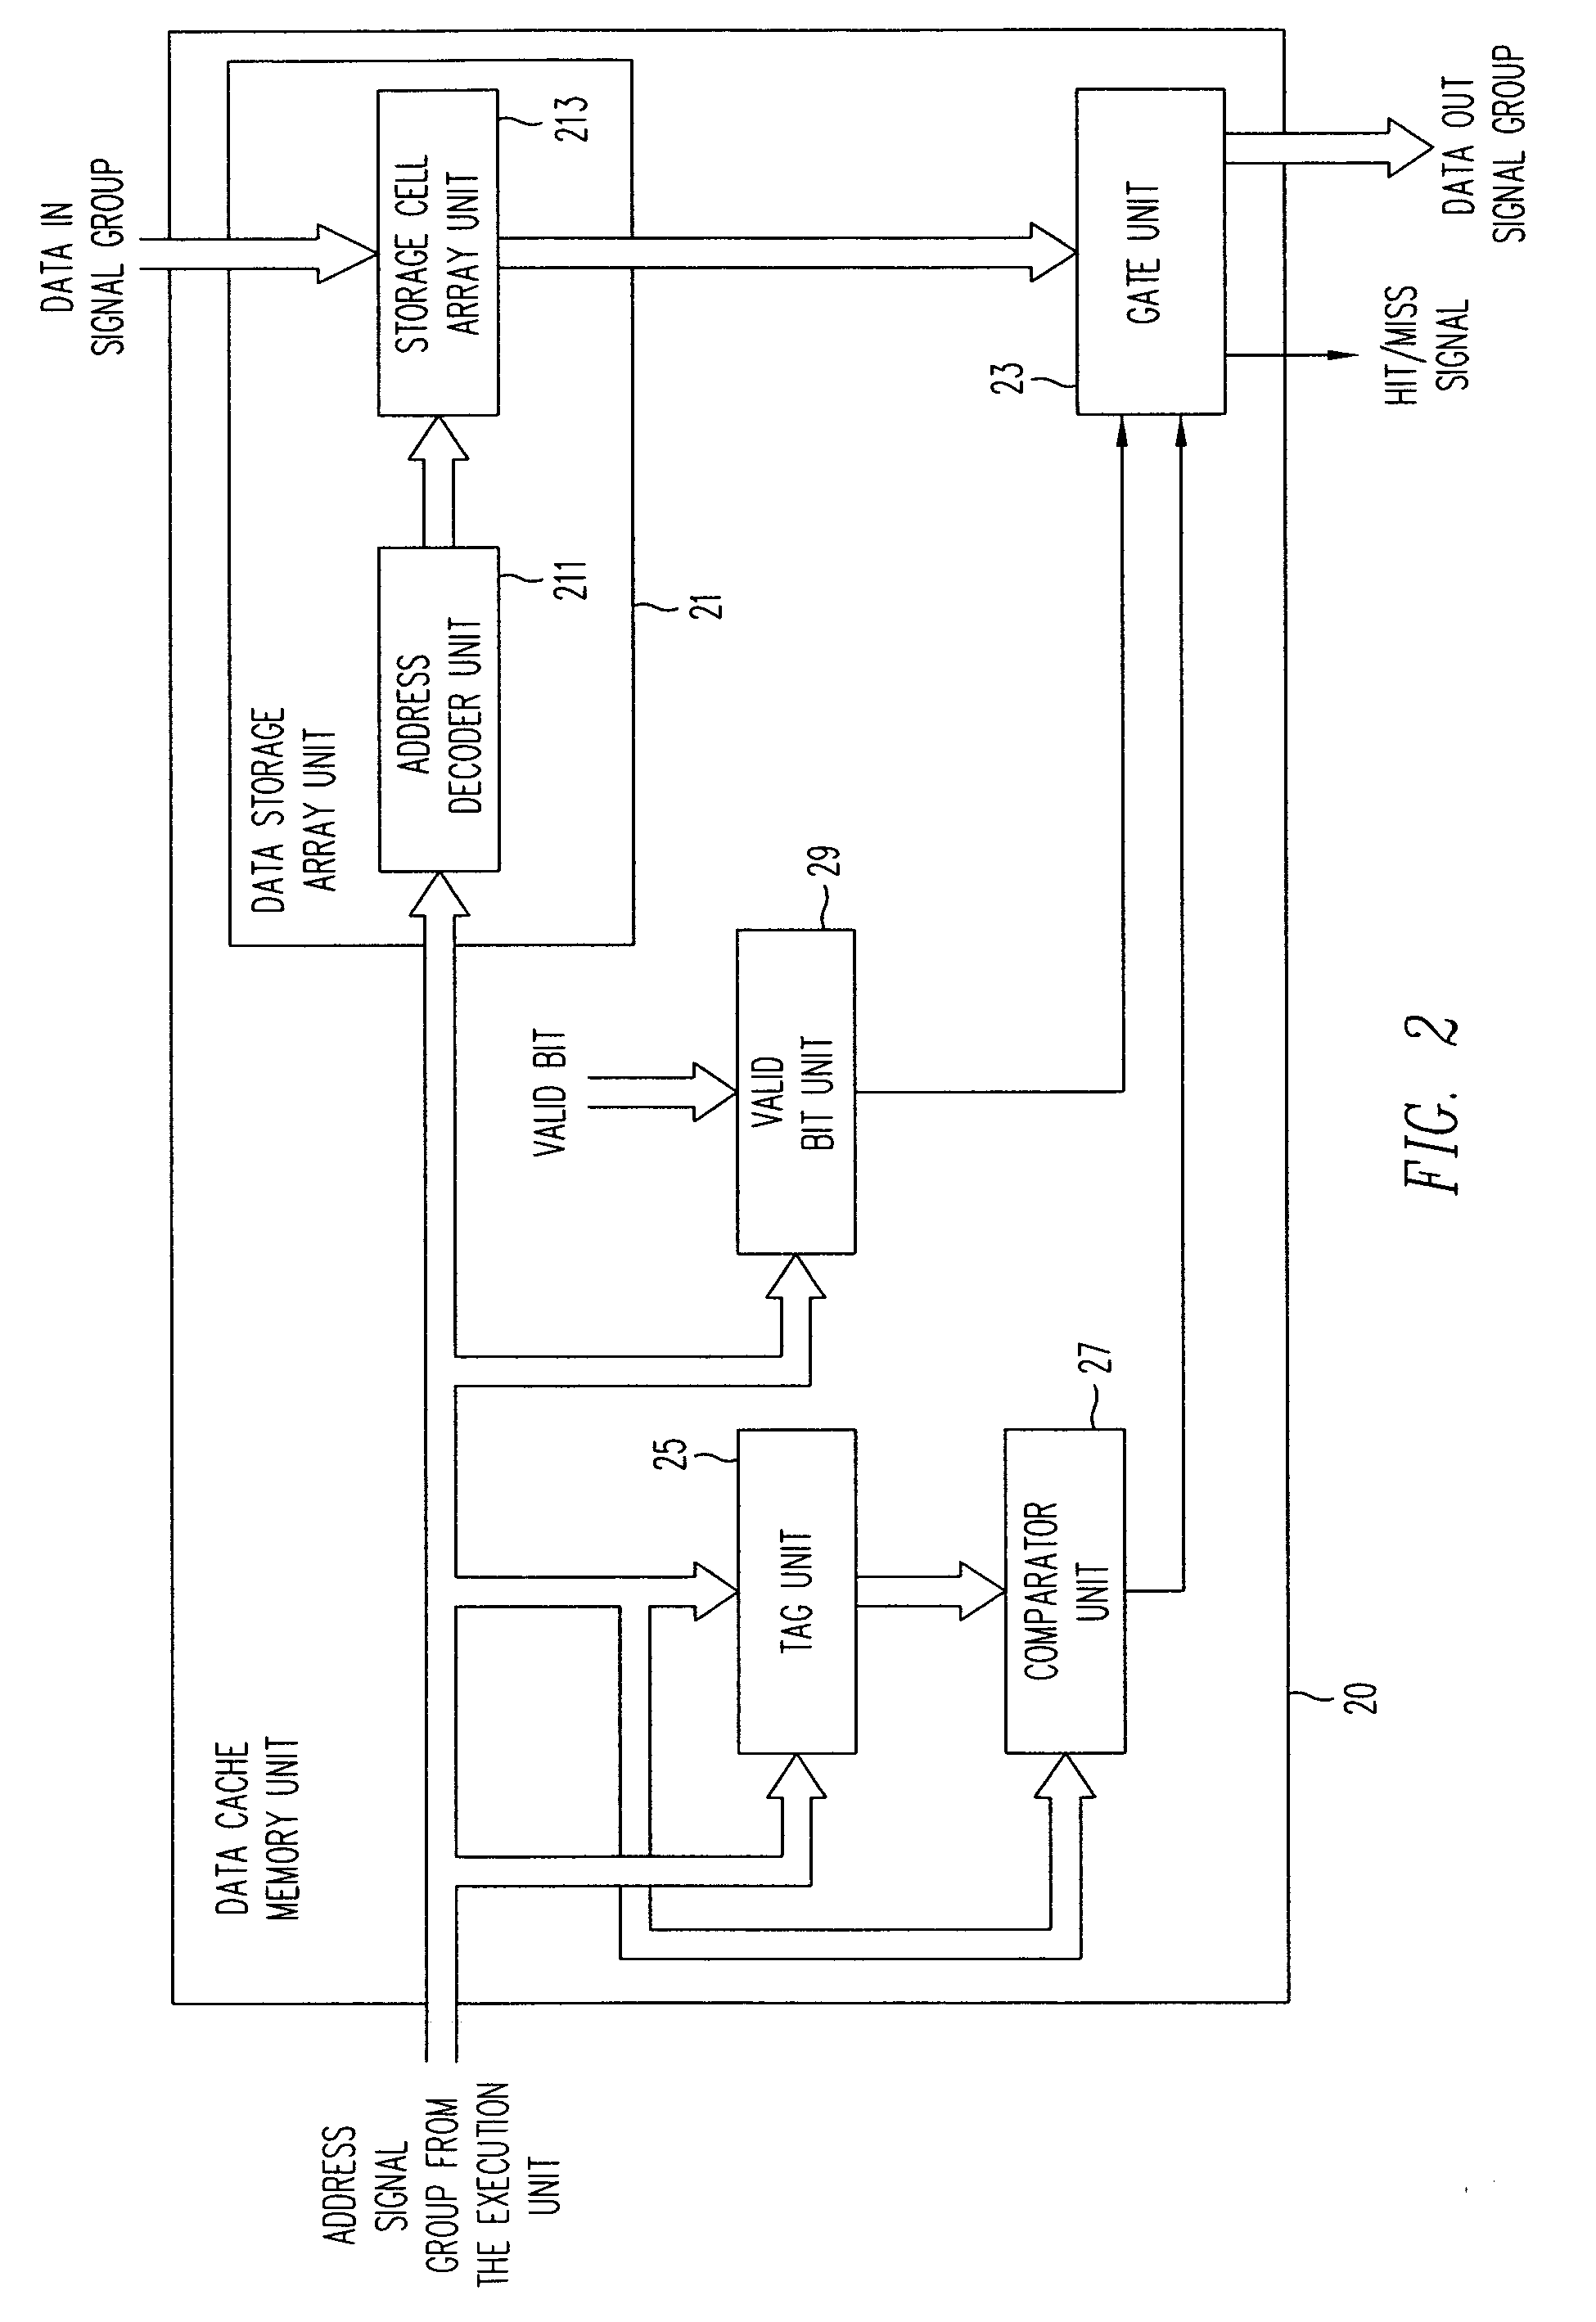 Apparatus and method for snoop access in a dual access, banked and pipelined data cache memory unit